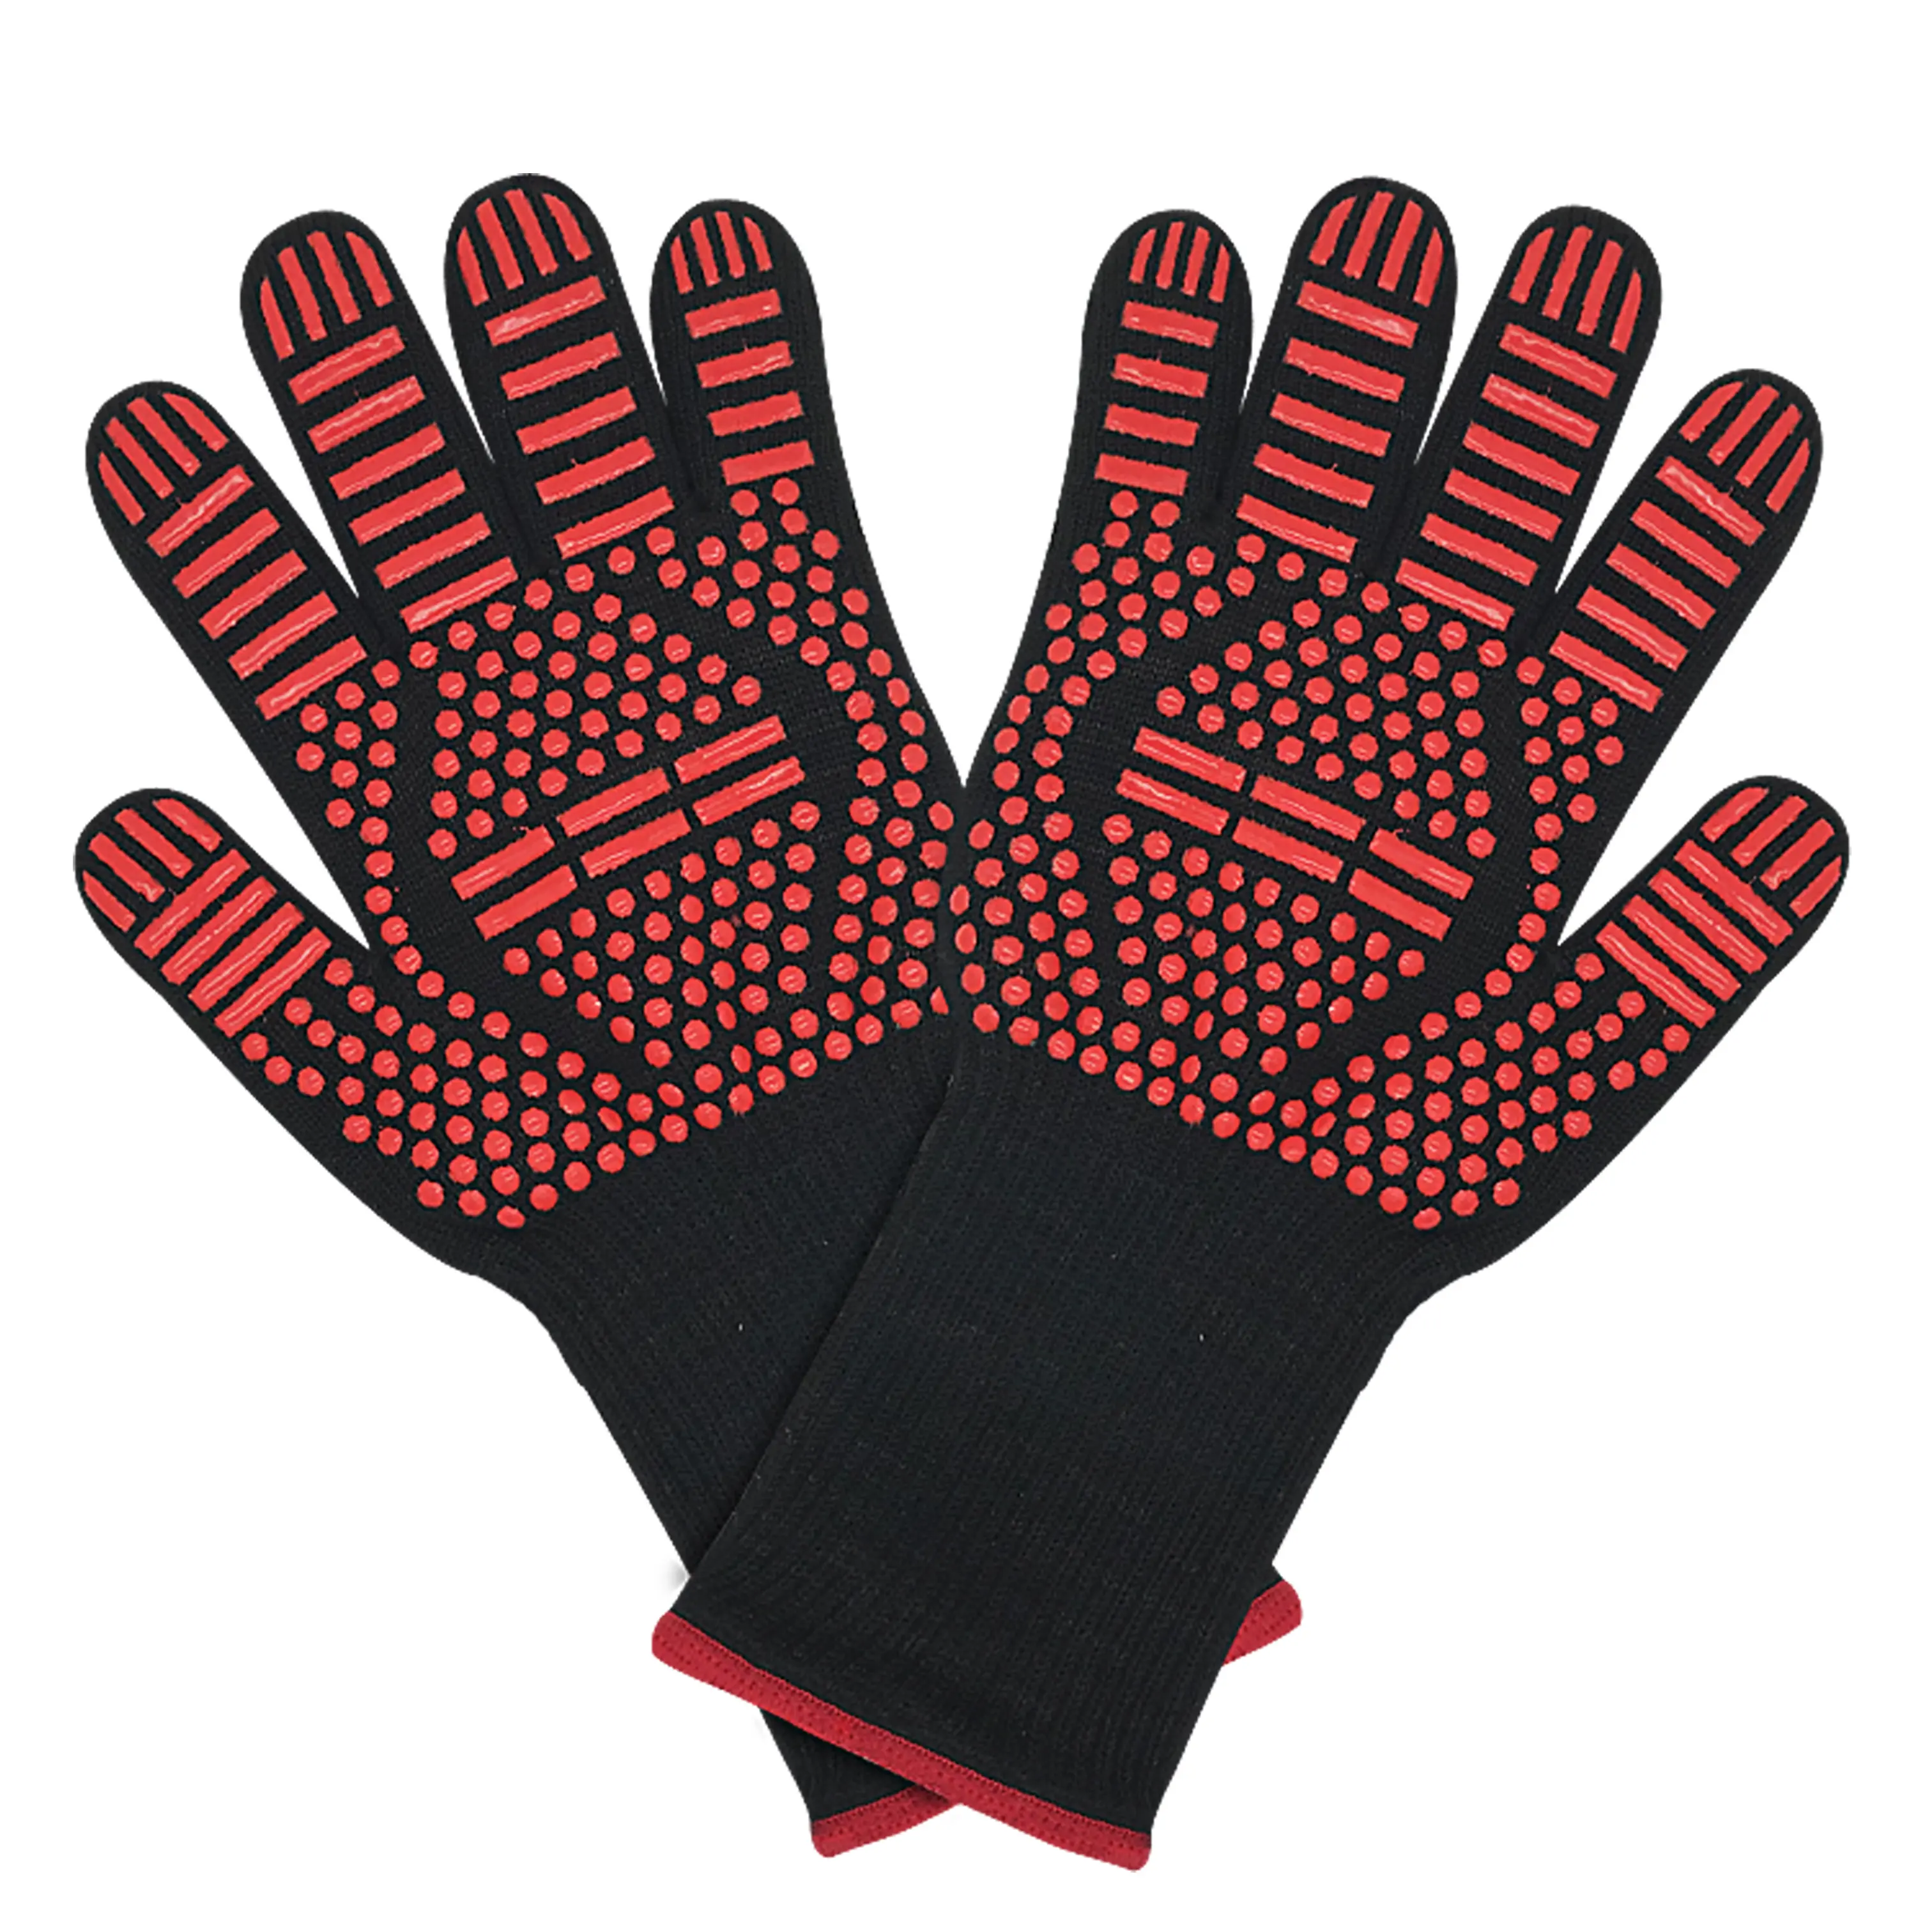 water-proof Aramid Barbecue Oven Mitts, 932f Extreme Heat Resistant BBQ Grill Gloves Kitchen Cooking Gloves For Baking